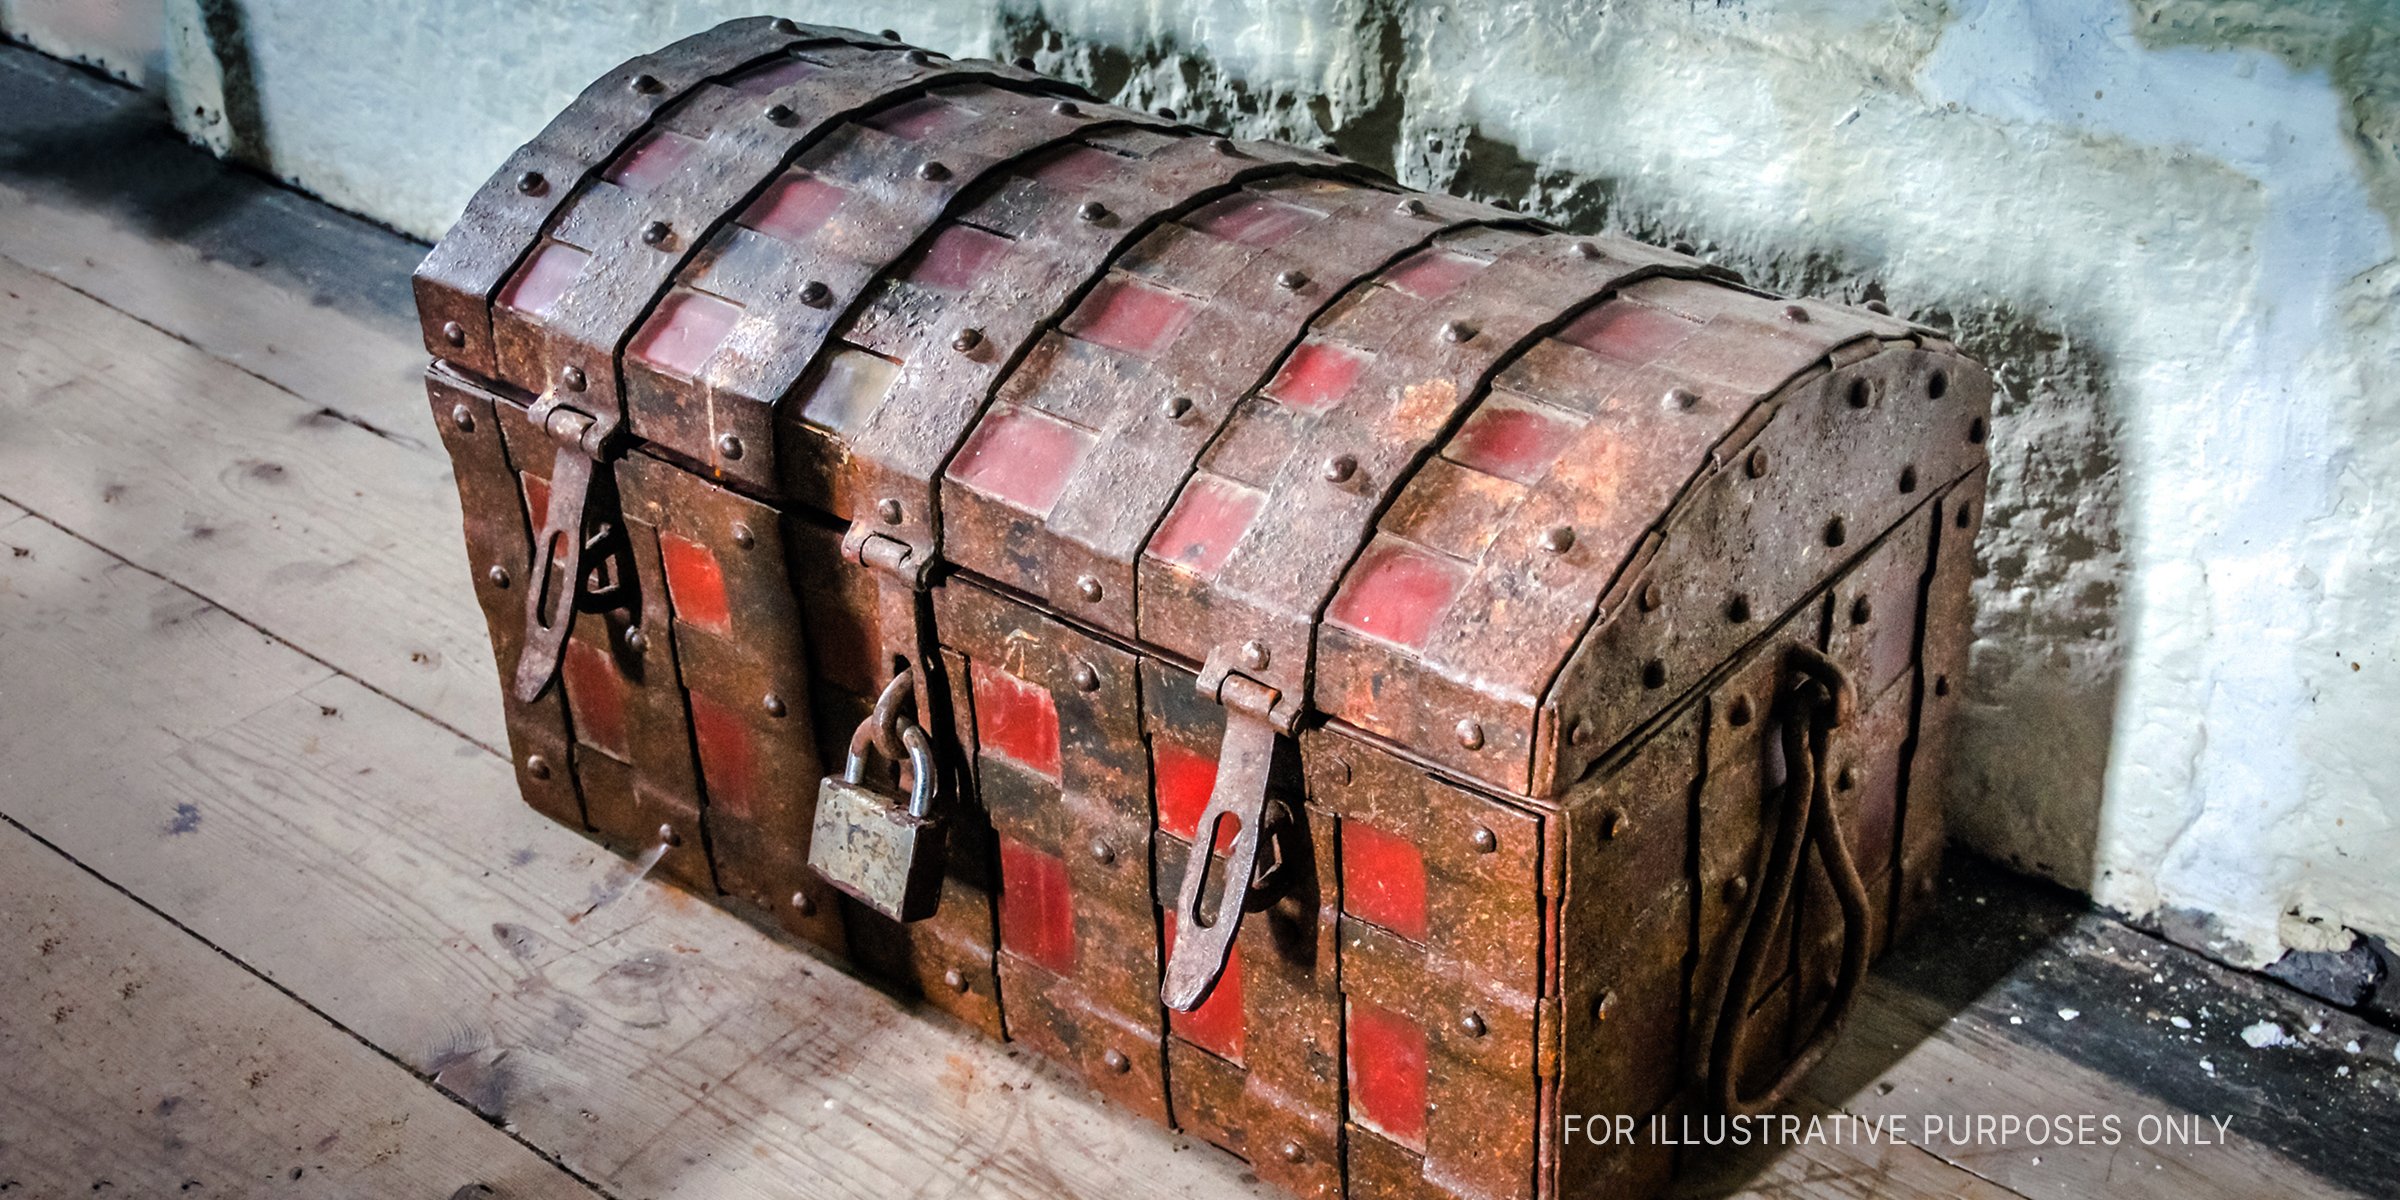 An old wooden chest on the floor | Source: Shutterstock